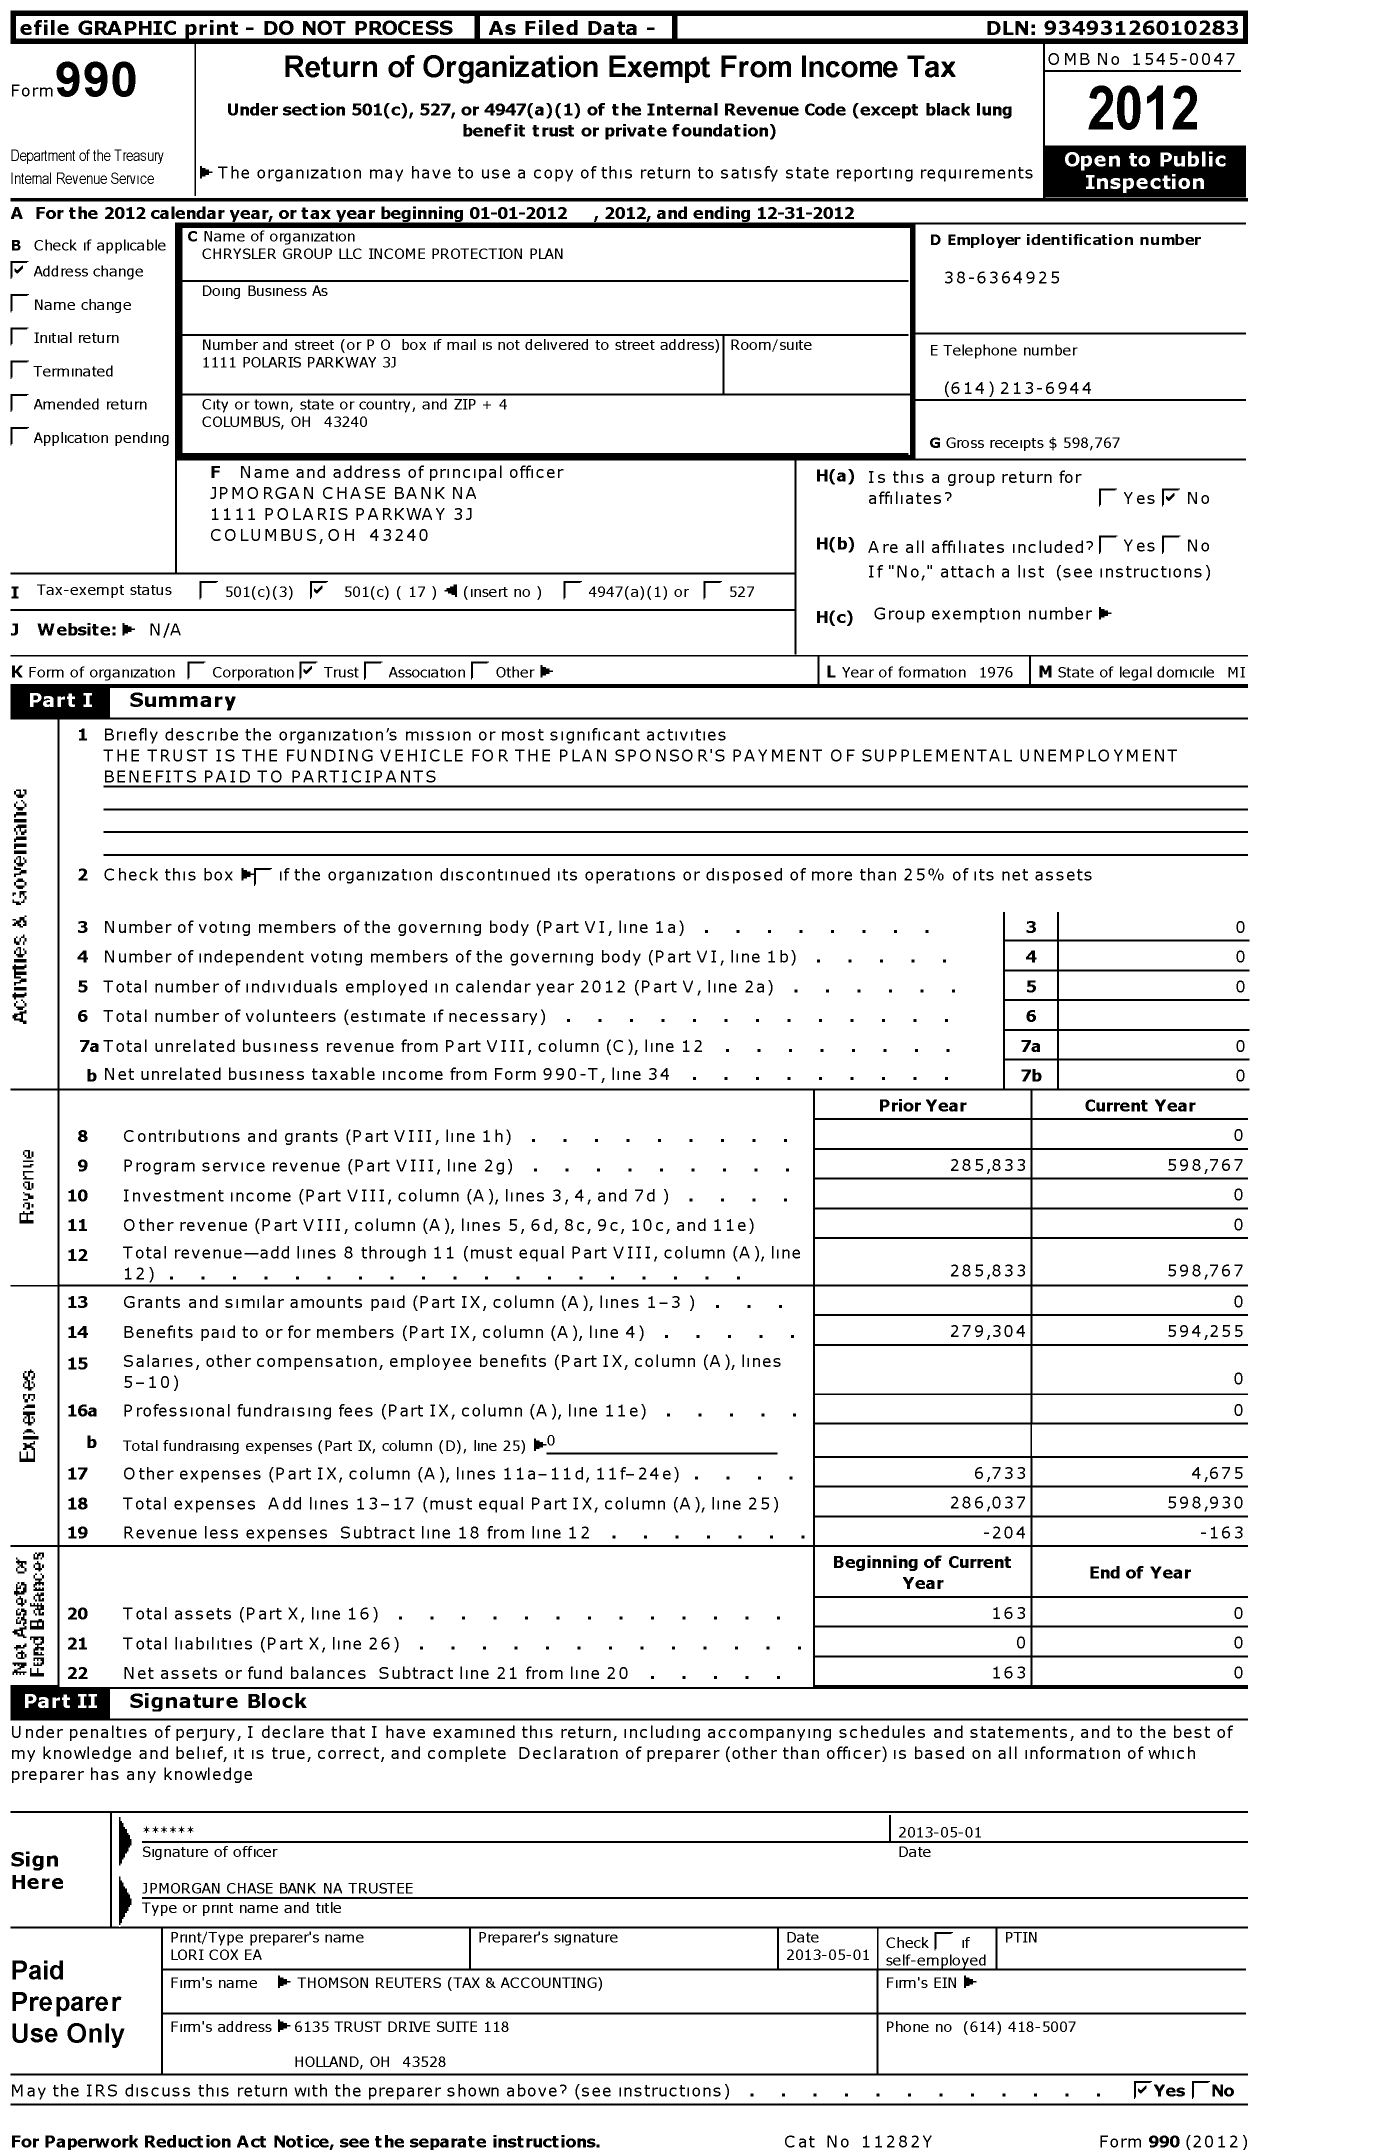 Image of first page of 2012 Form 990O for Chrysler Group LLC Income Protection Plan